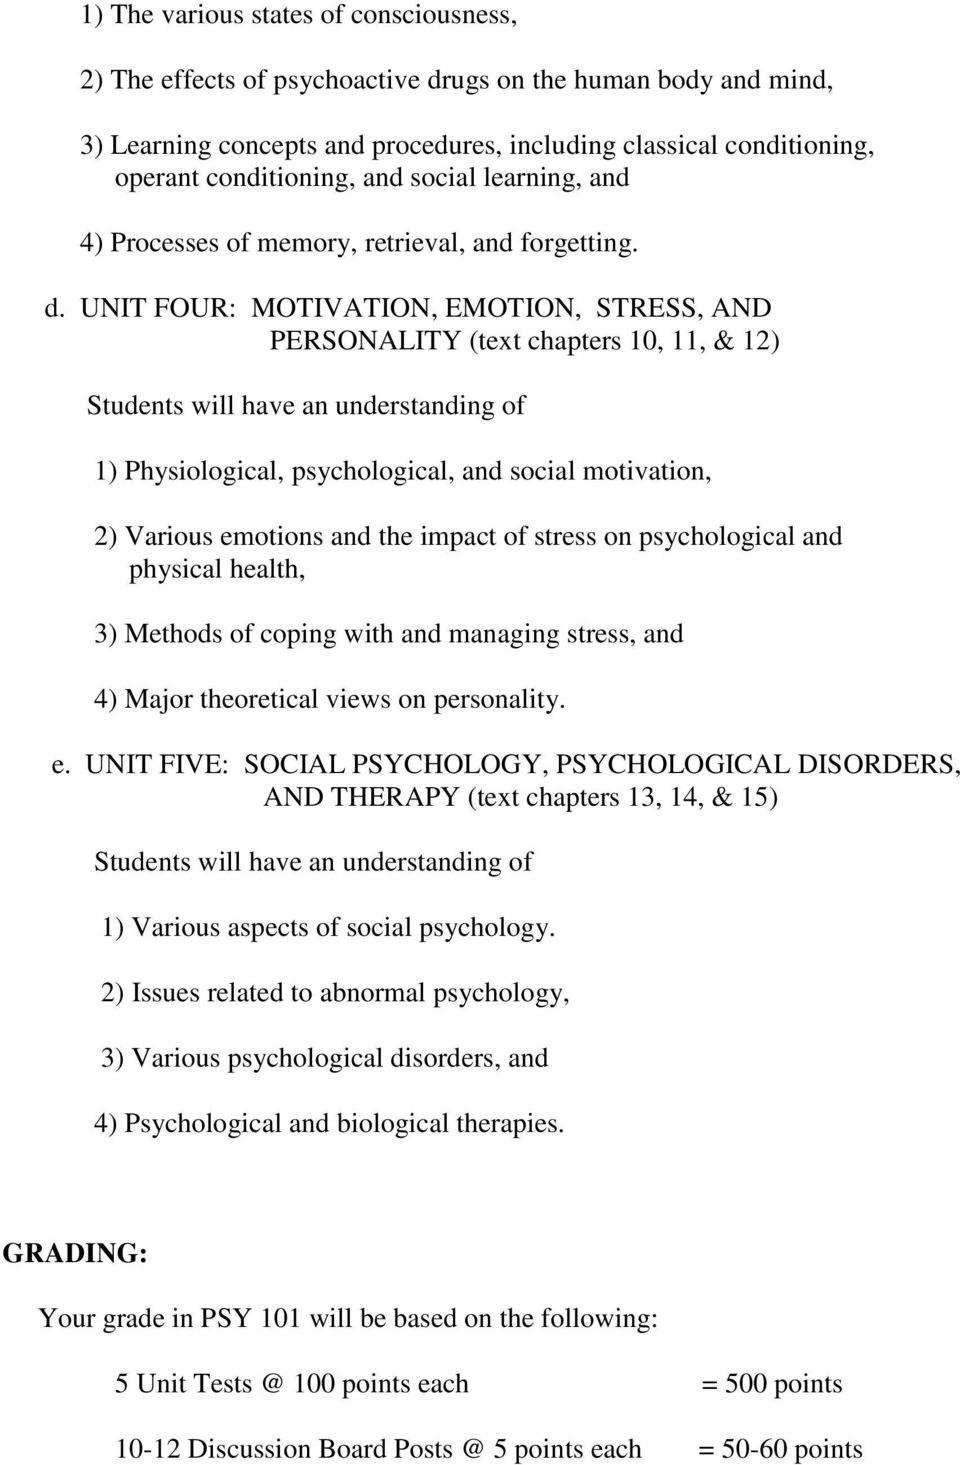 UNIT FOUR: MOTIVATION, EMOTION, STRESS, AND PERSONALITY (text chapters 10, 11, & 12) 1) Physiological, psychological, and social motivation, 2) Various emotions and the impact of stress on